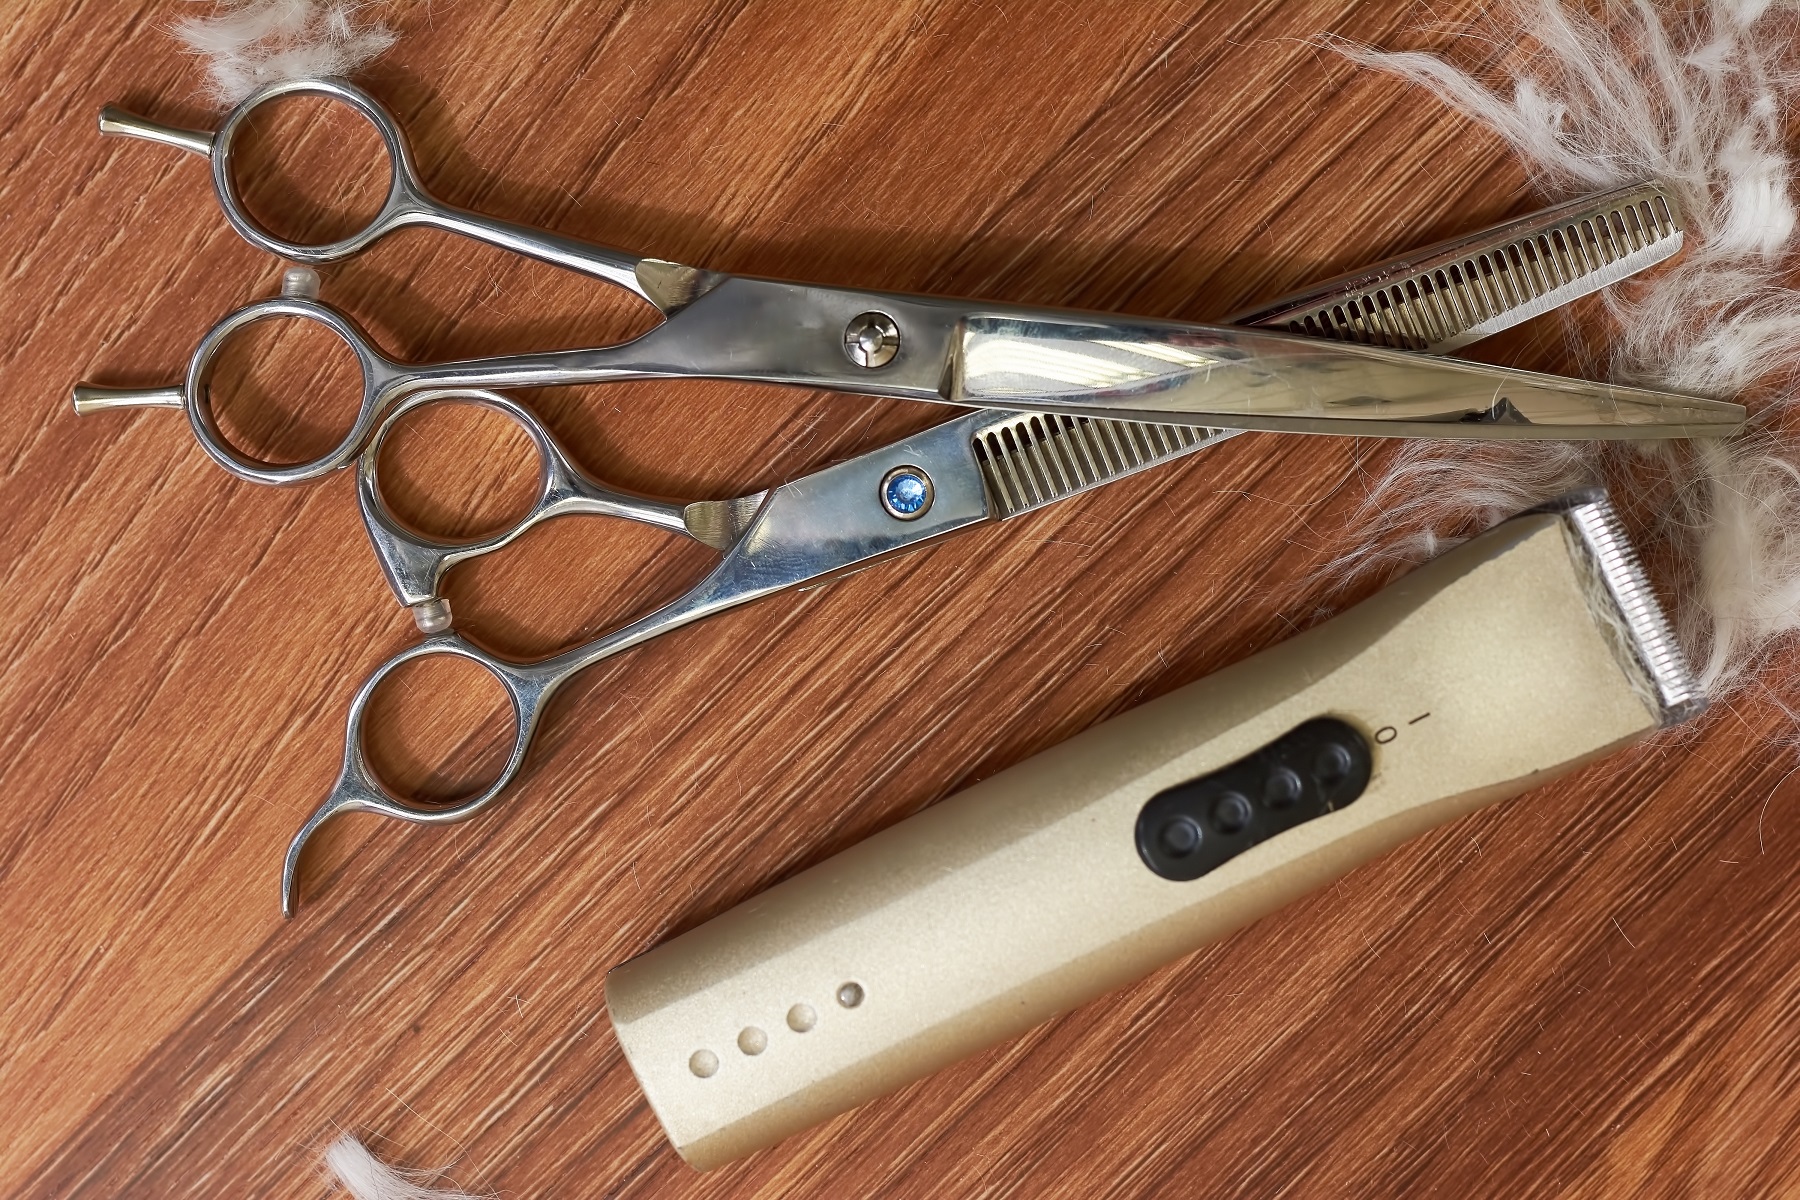 Dog grooming clippers & shears